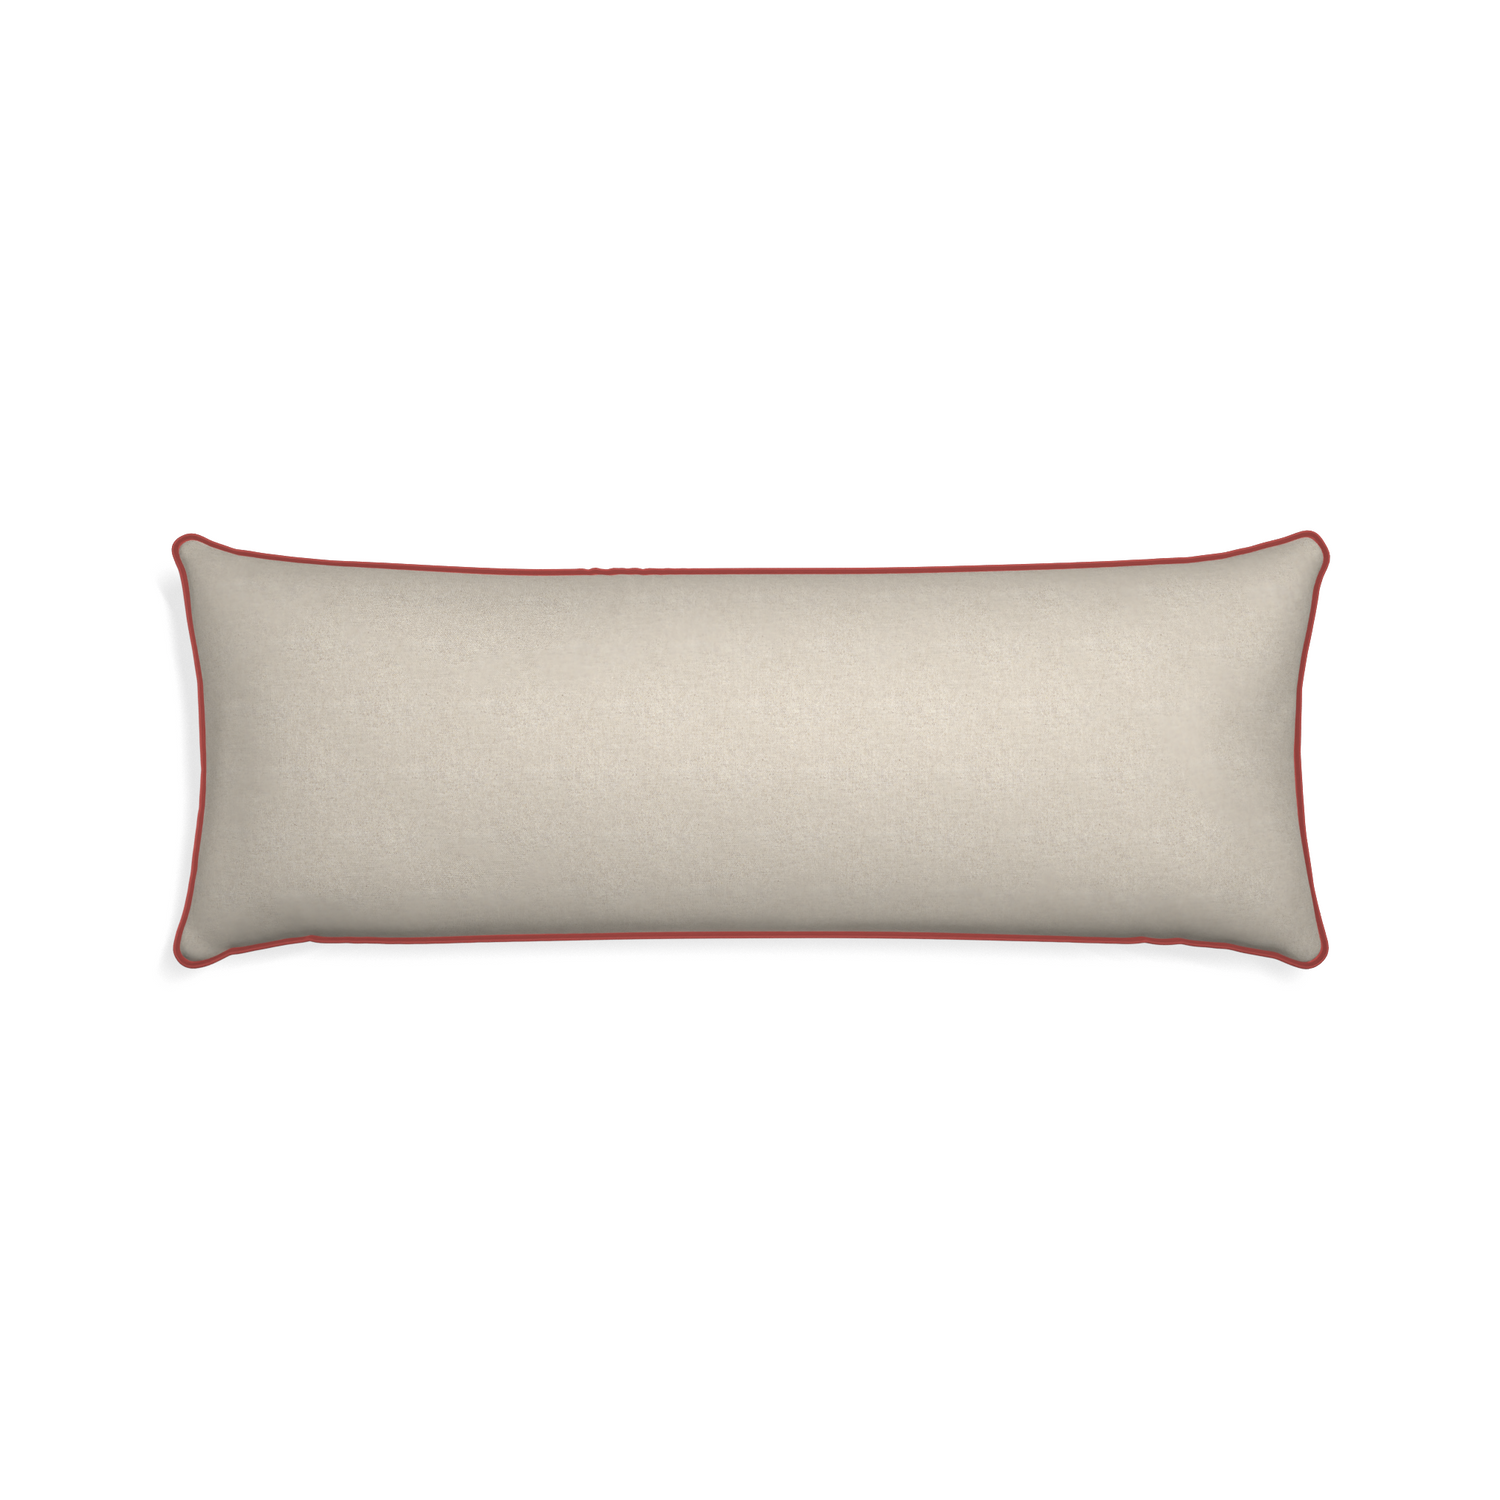 Xl-lumbar oat custom light brownpillow with c piping on white background